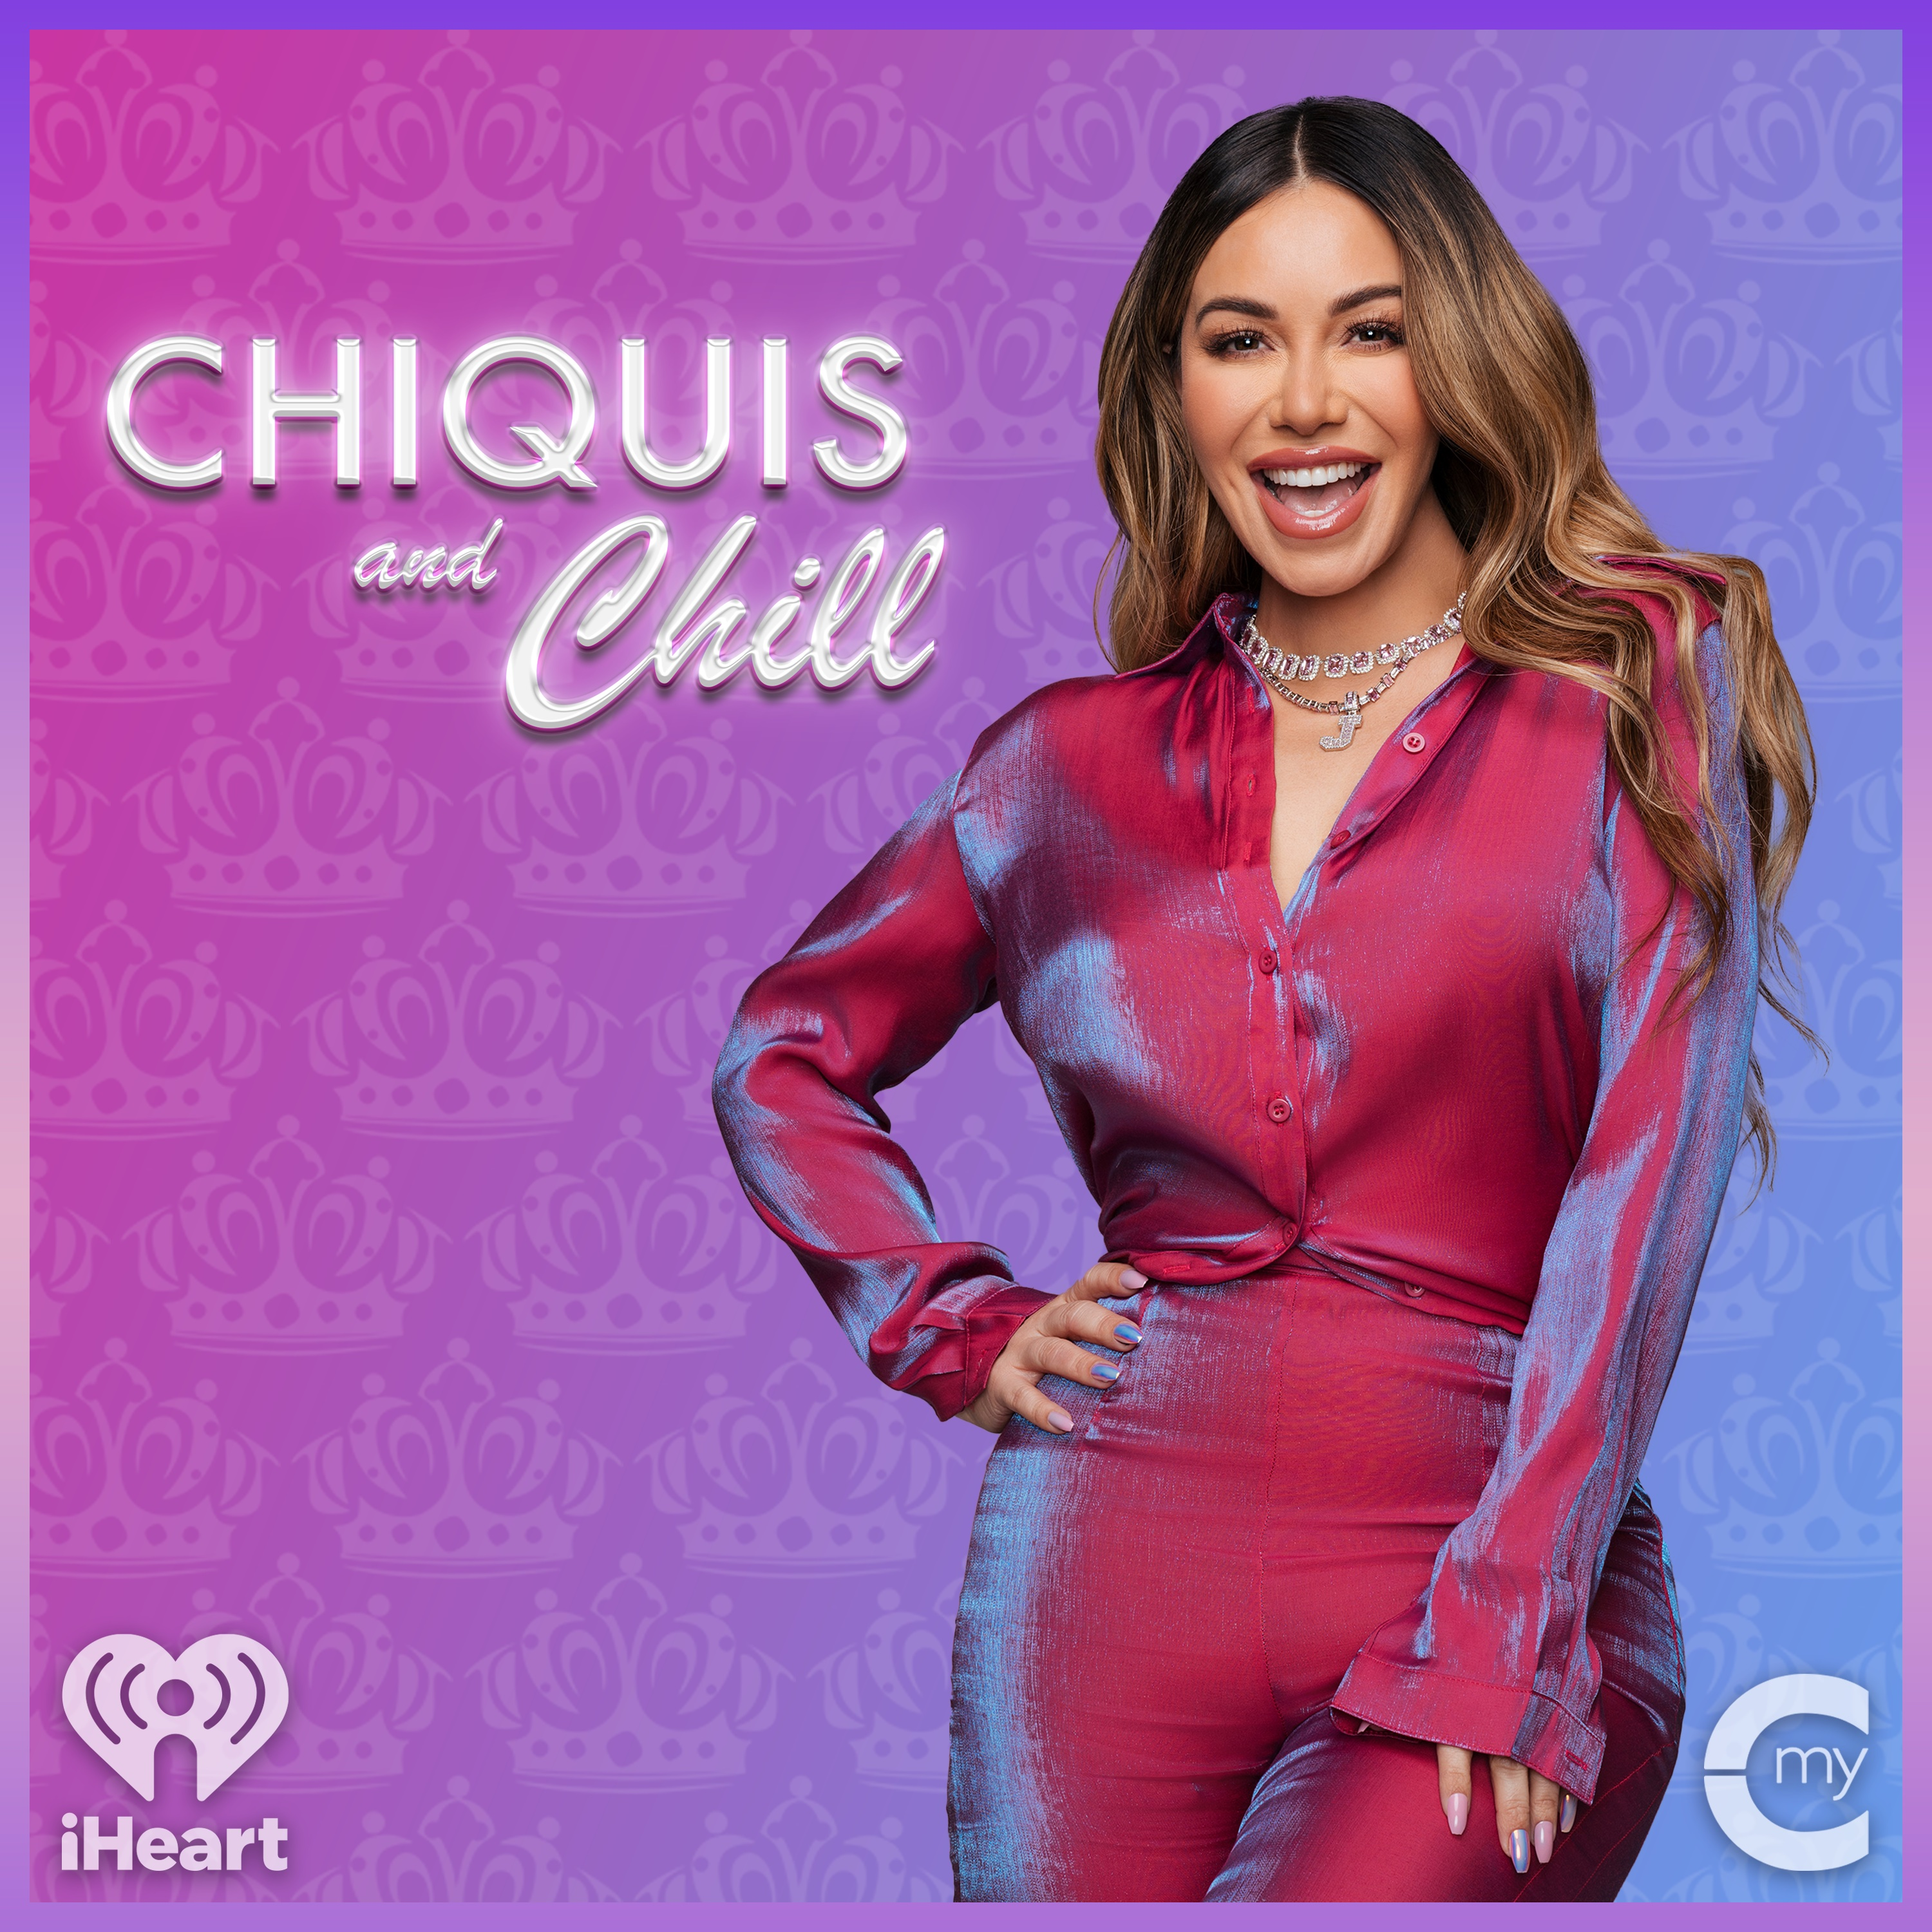 Ask Chiquis Anything Part 2